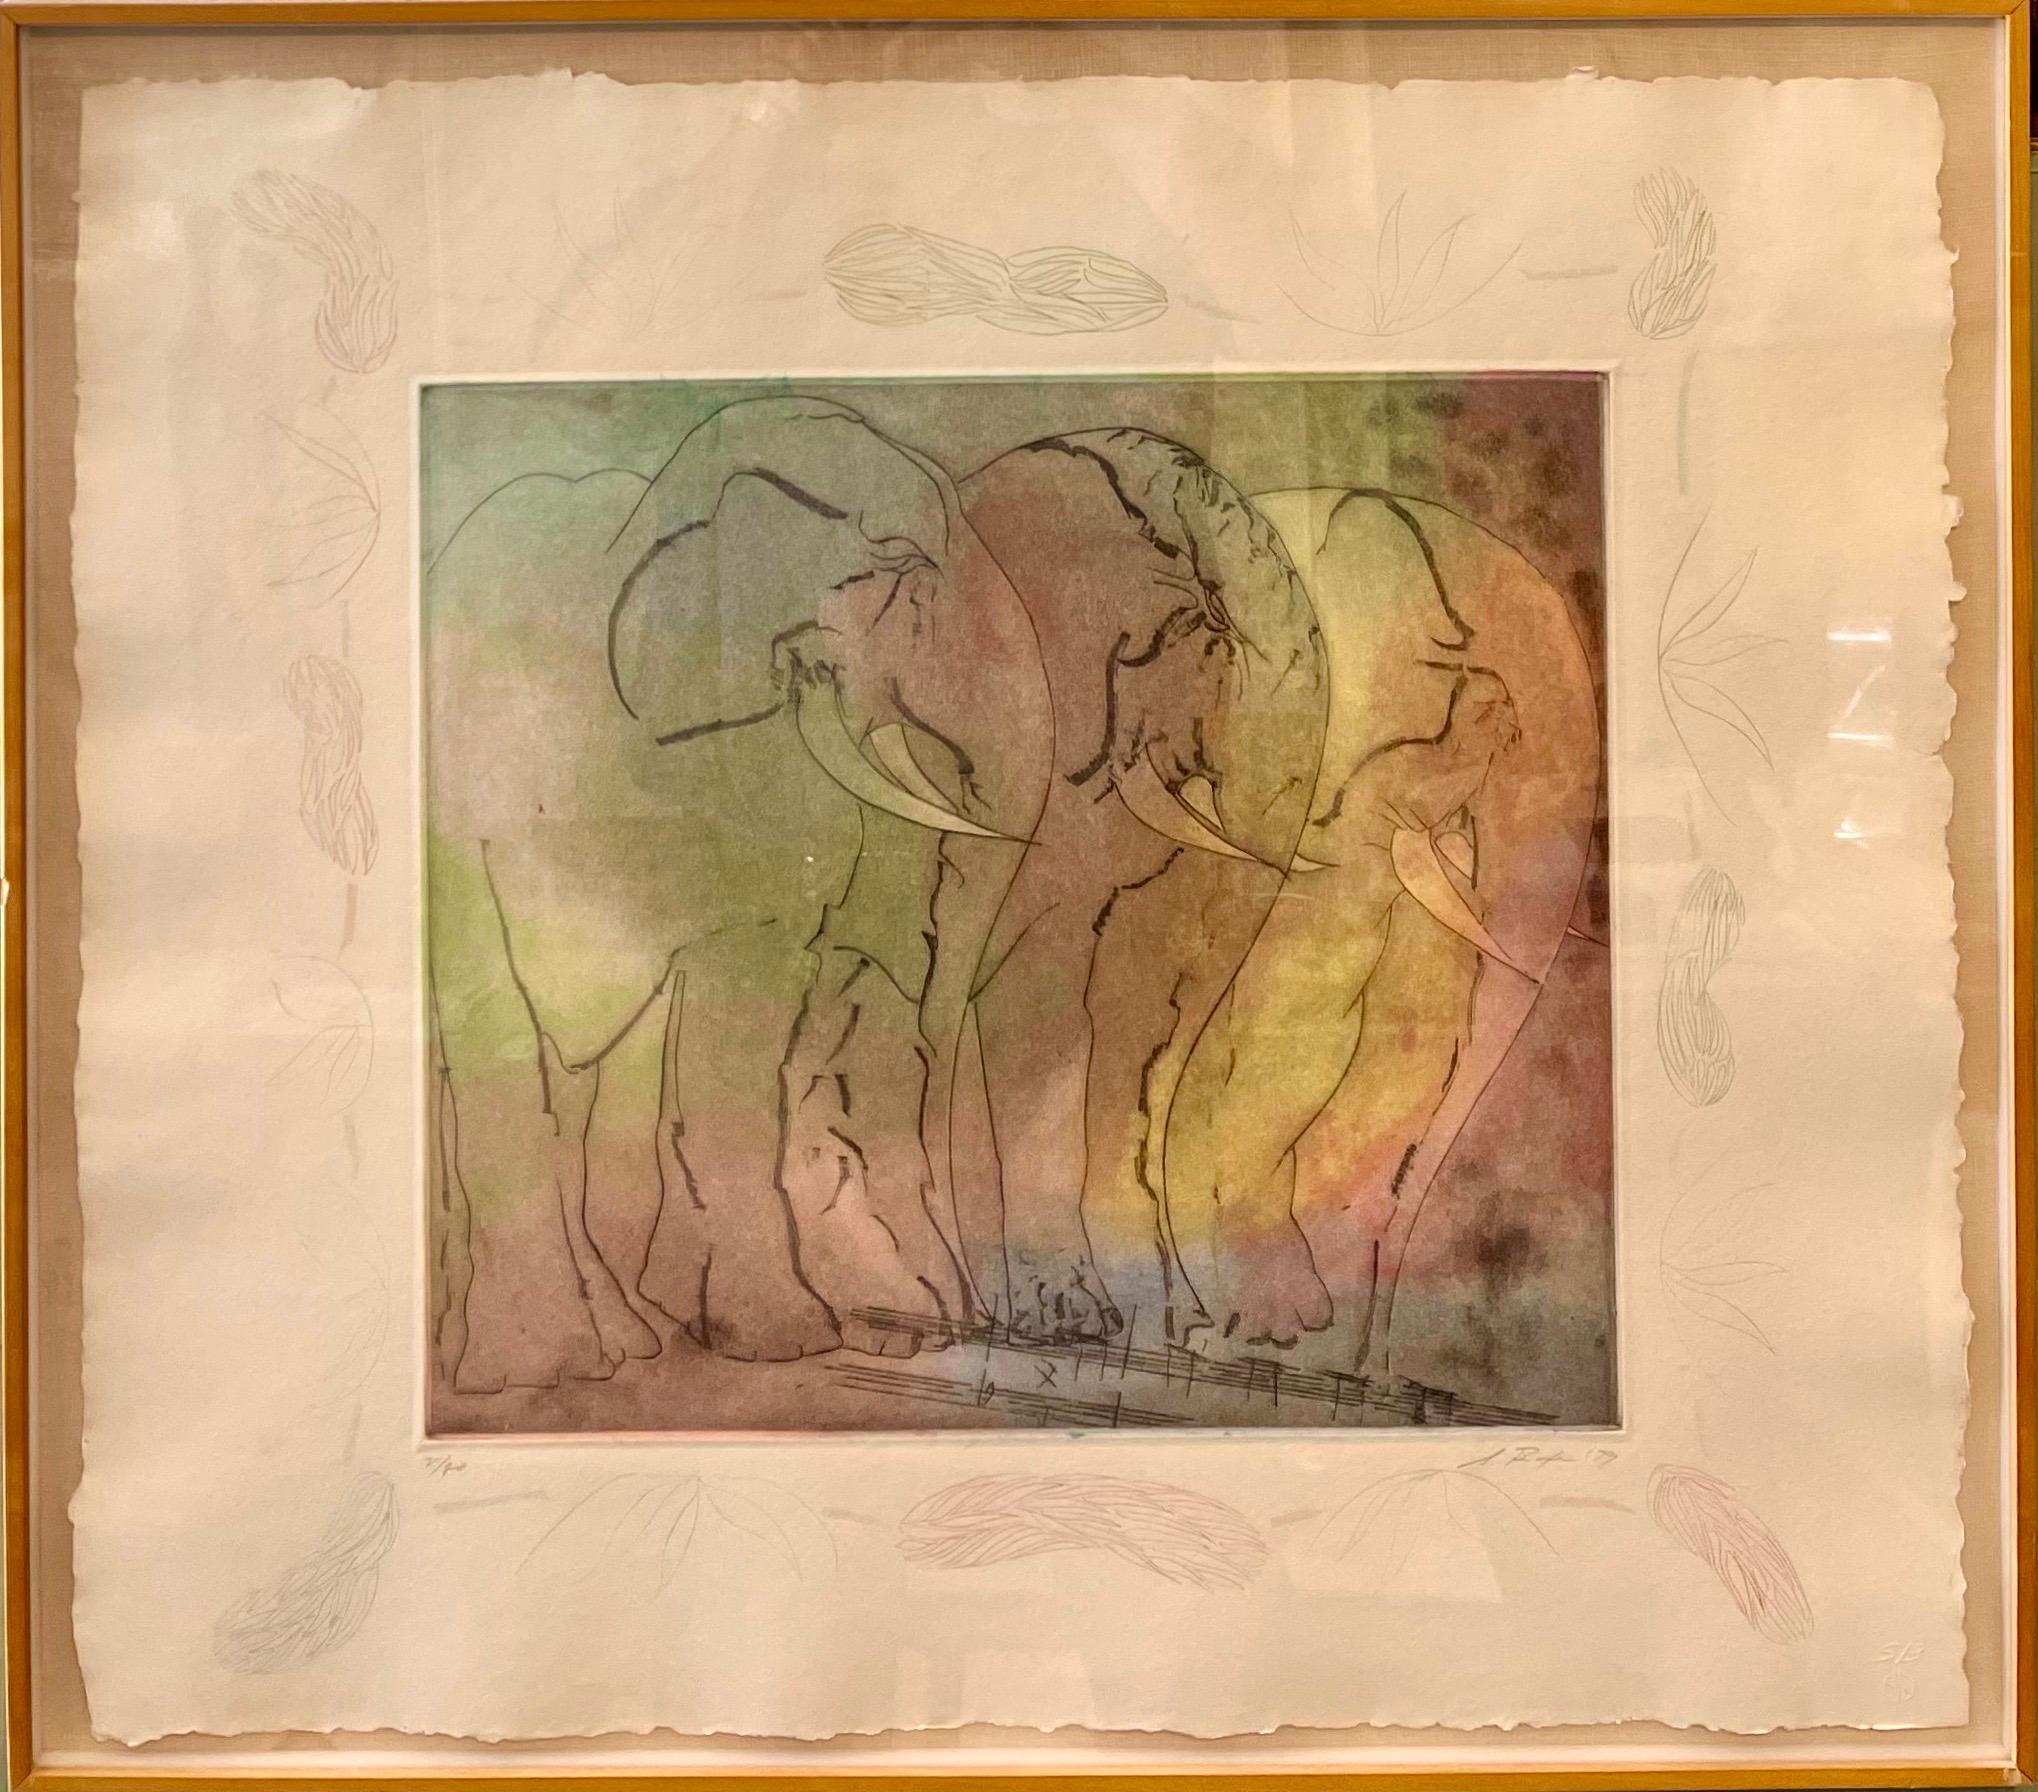 
Elephants. 1979
edition 2/20
Hand signed and dated
Framed 24.5 X 28.  Sheet 23 X 26

This is from a series of prints Boxer produced at Tyler Graphics between 1975 and 1979. Over this period, he created several series of intricately rendered